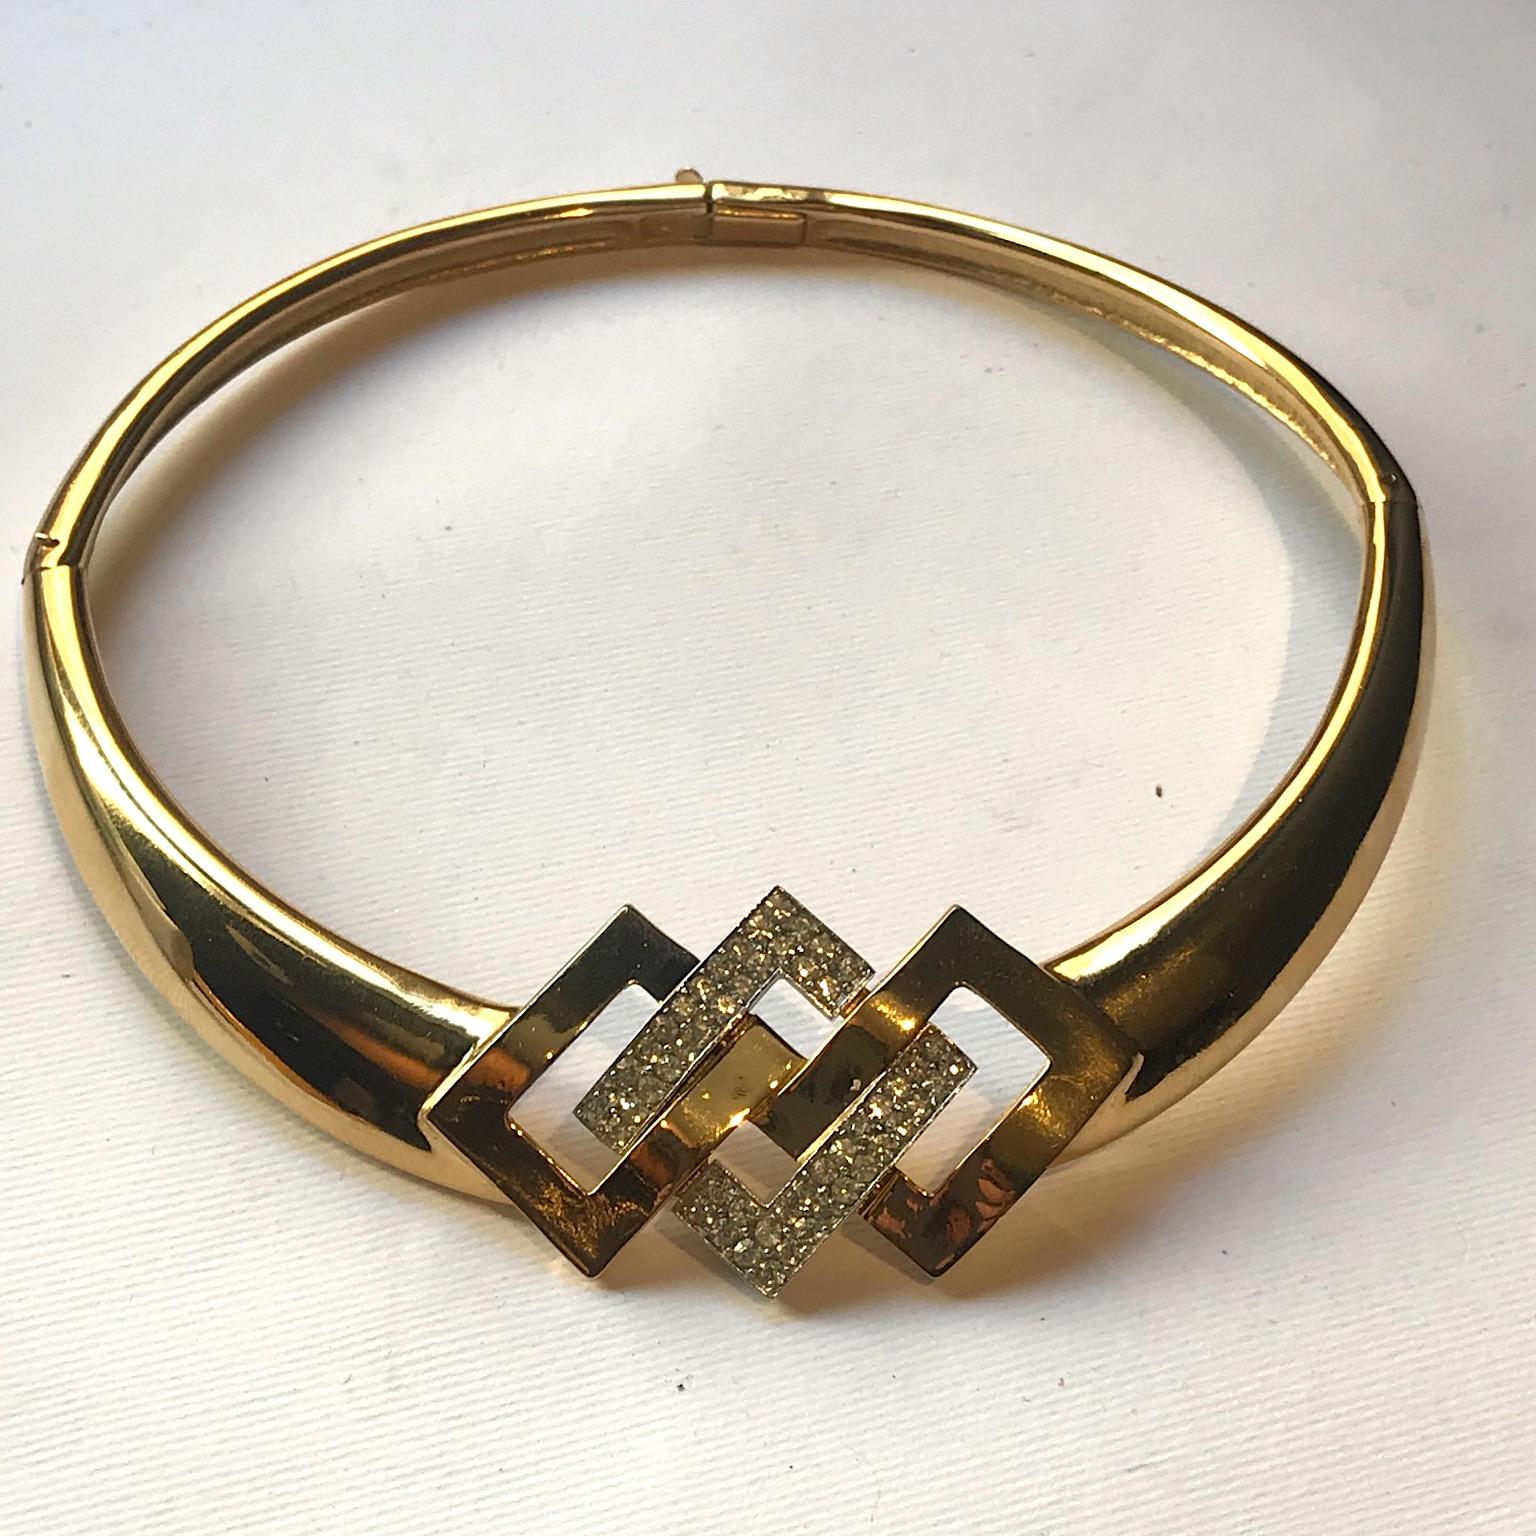 A late 1970s to 1980s rigid style collar necklace by fashion house Lanvin of France. The necklace features a central geometric design of three interlocking rectangles turned on a point. The center rectangle is rhodium plated and set with pave'